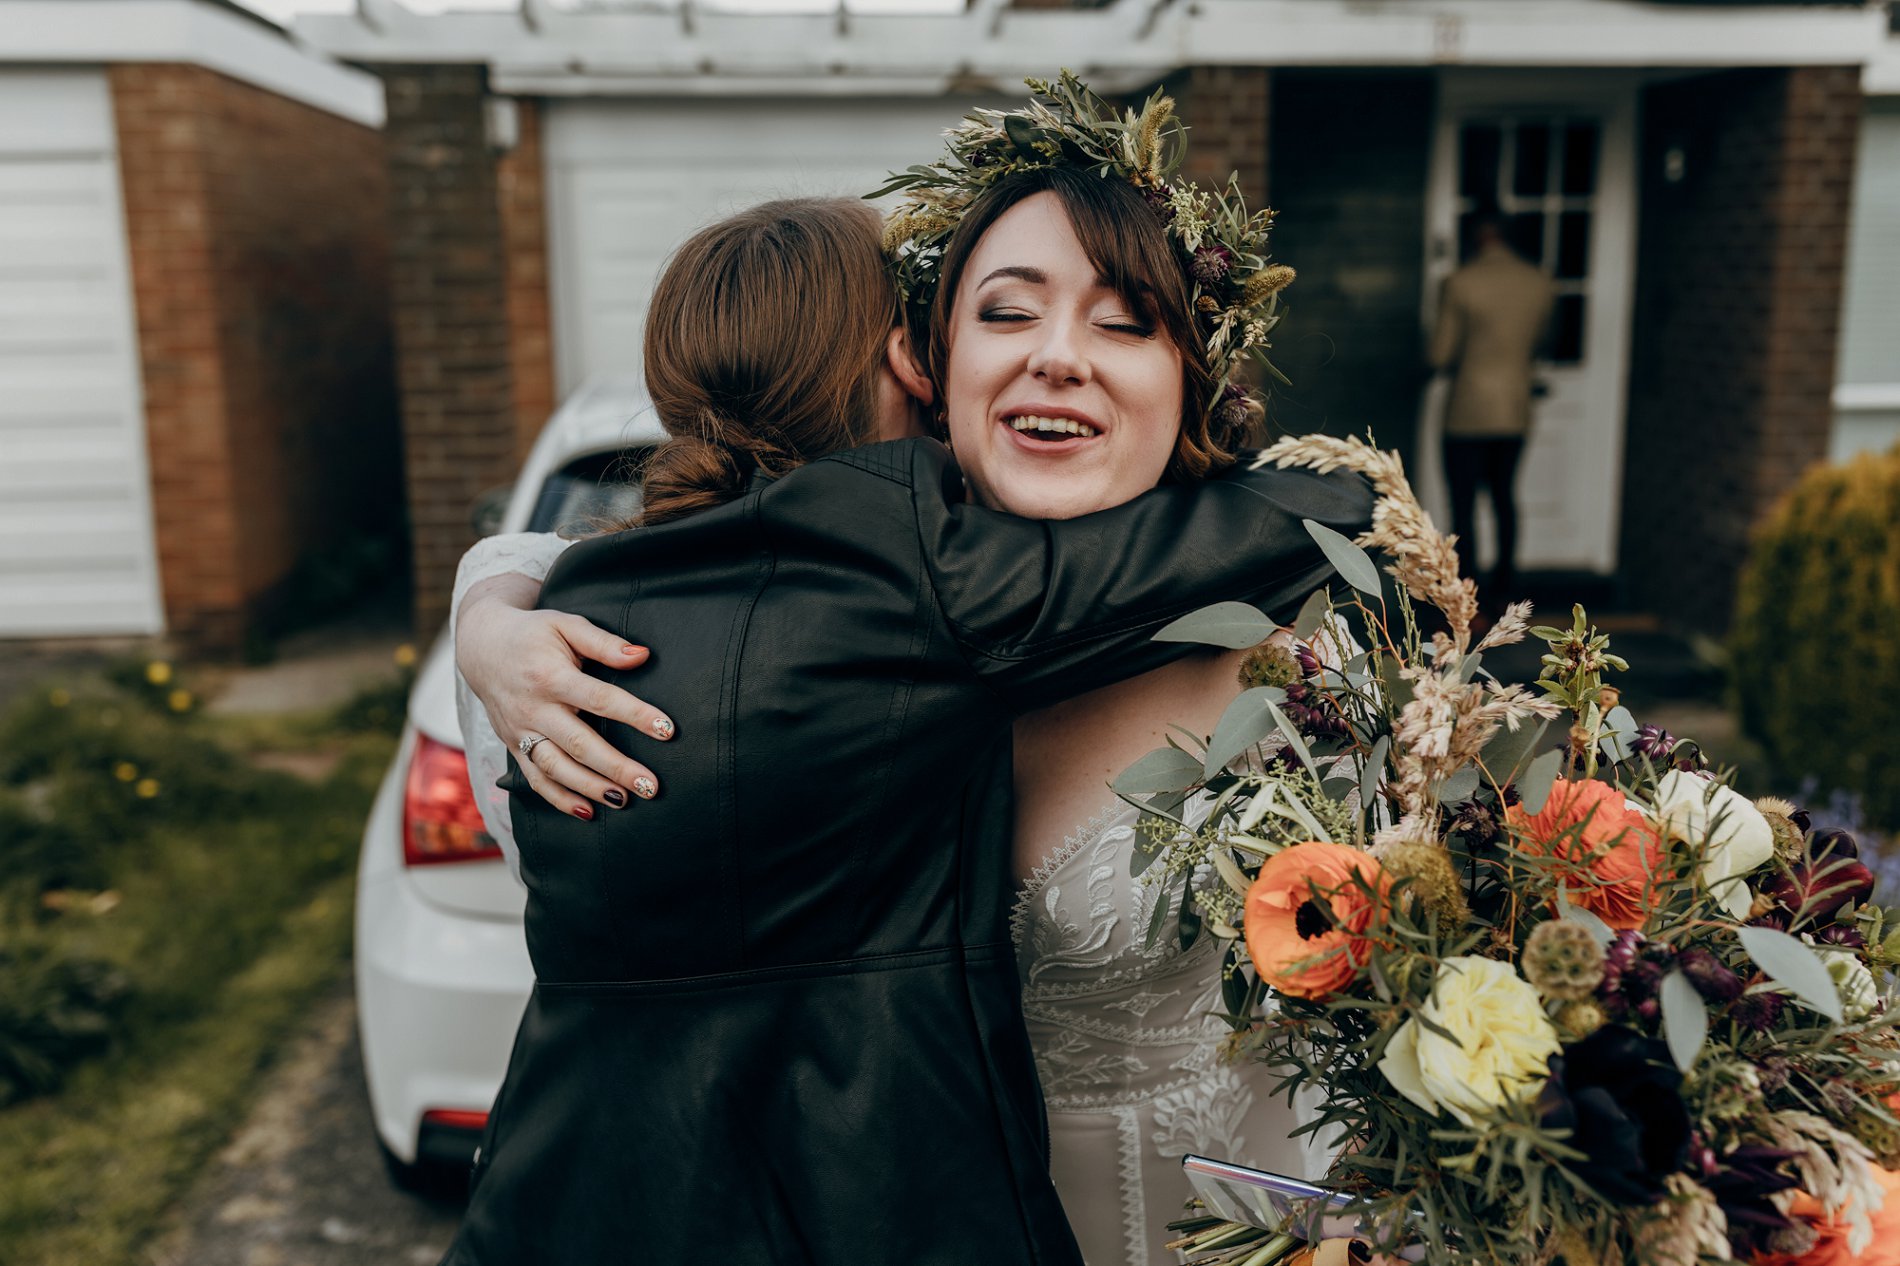 Northumberland Elopement (c) Chocolate Chip Photography (34)